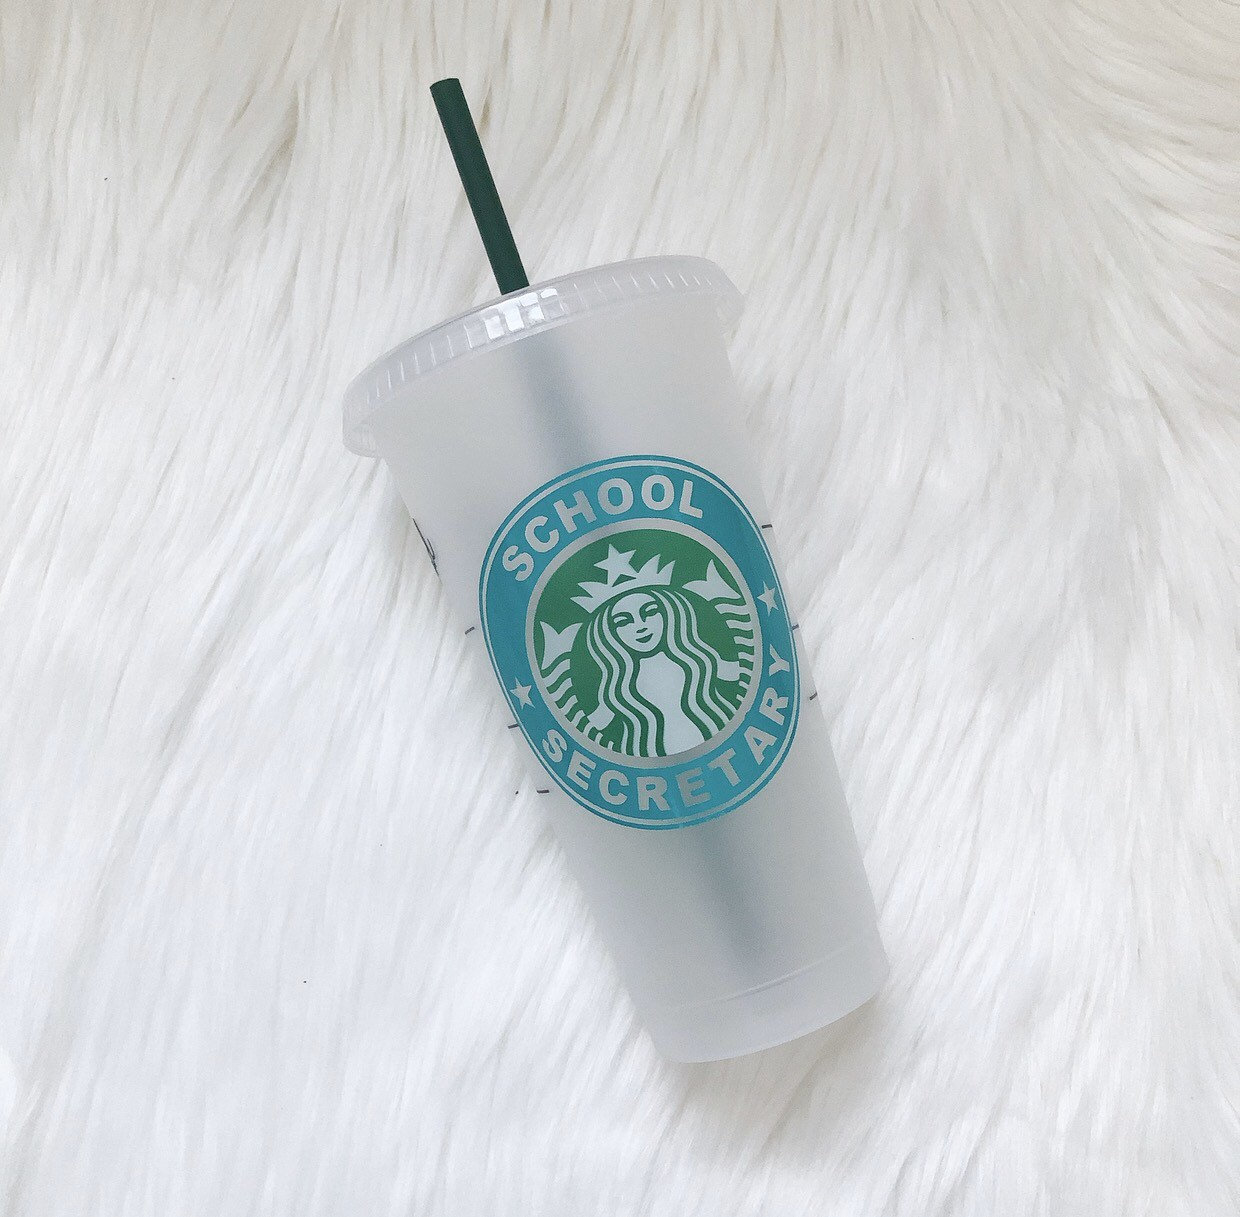 DIY Customized Starbucks Cups - Personalize With a Name! - Jennifer Maker